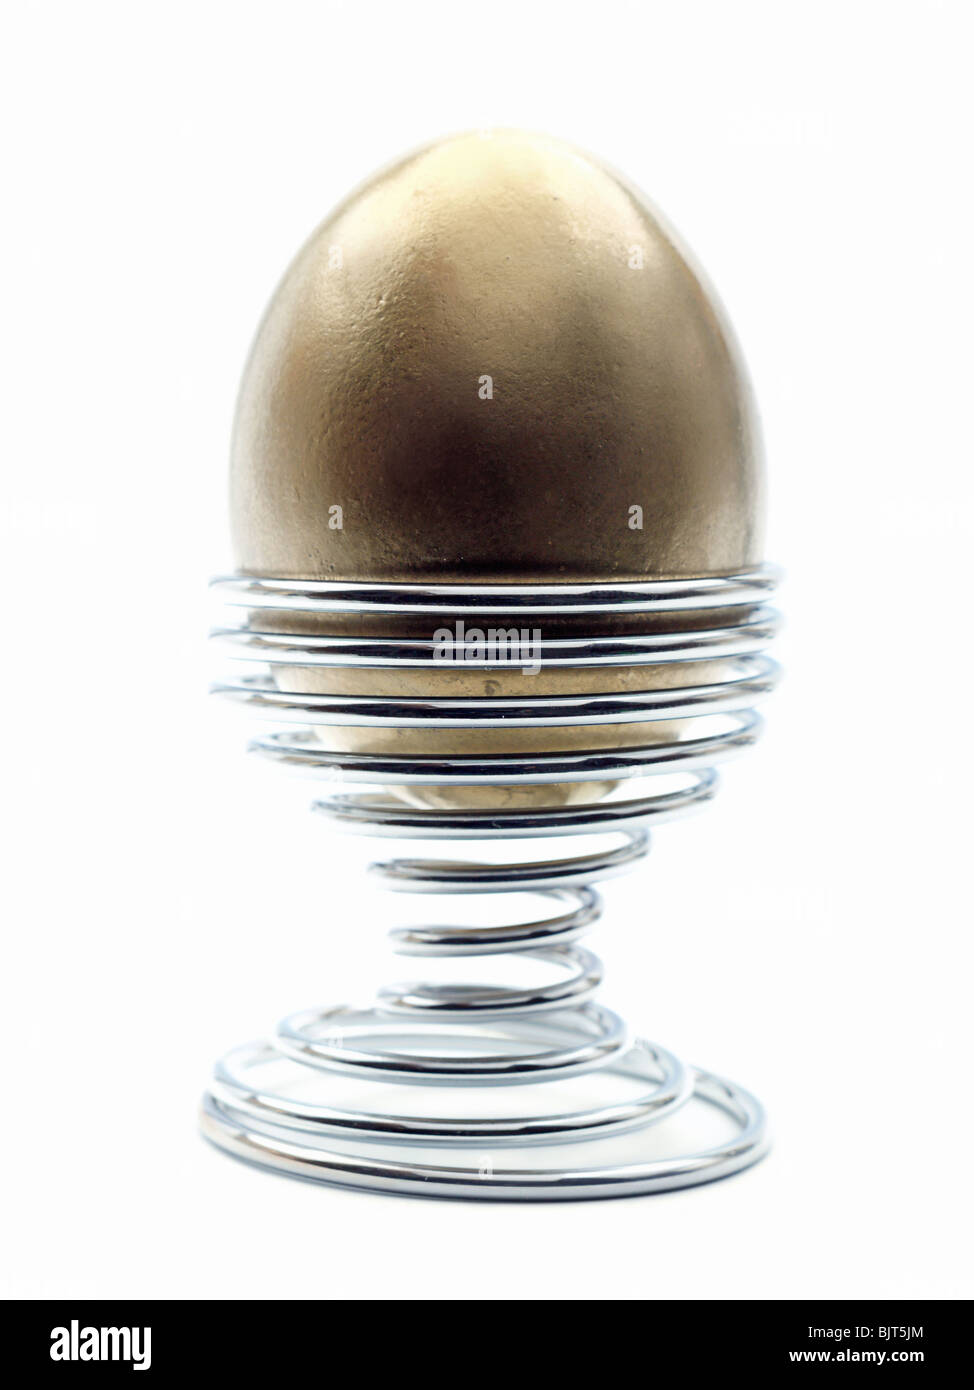 Golden egg in metal stand over white background Stock Photo